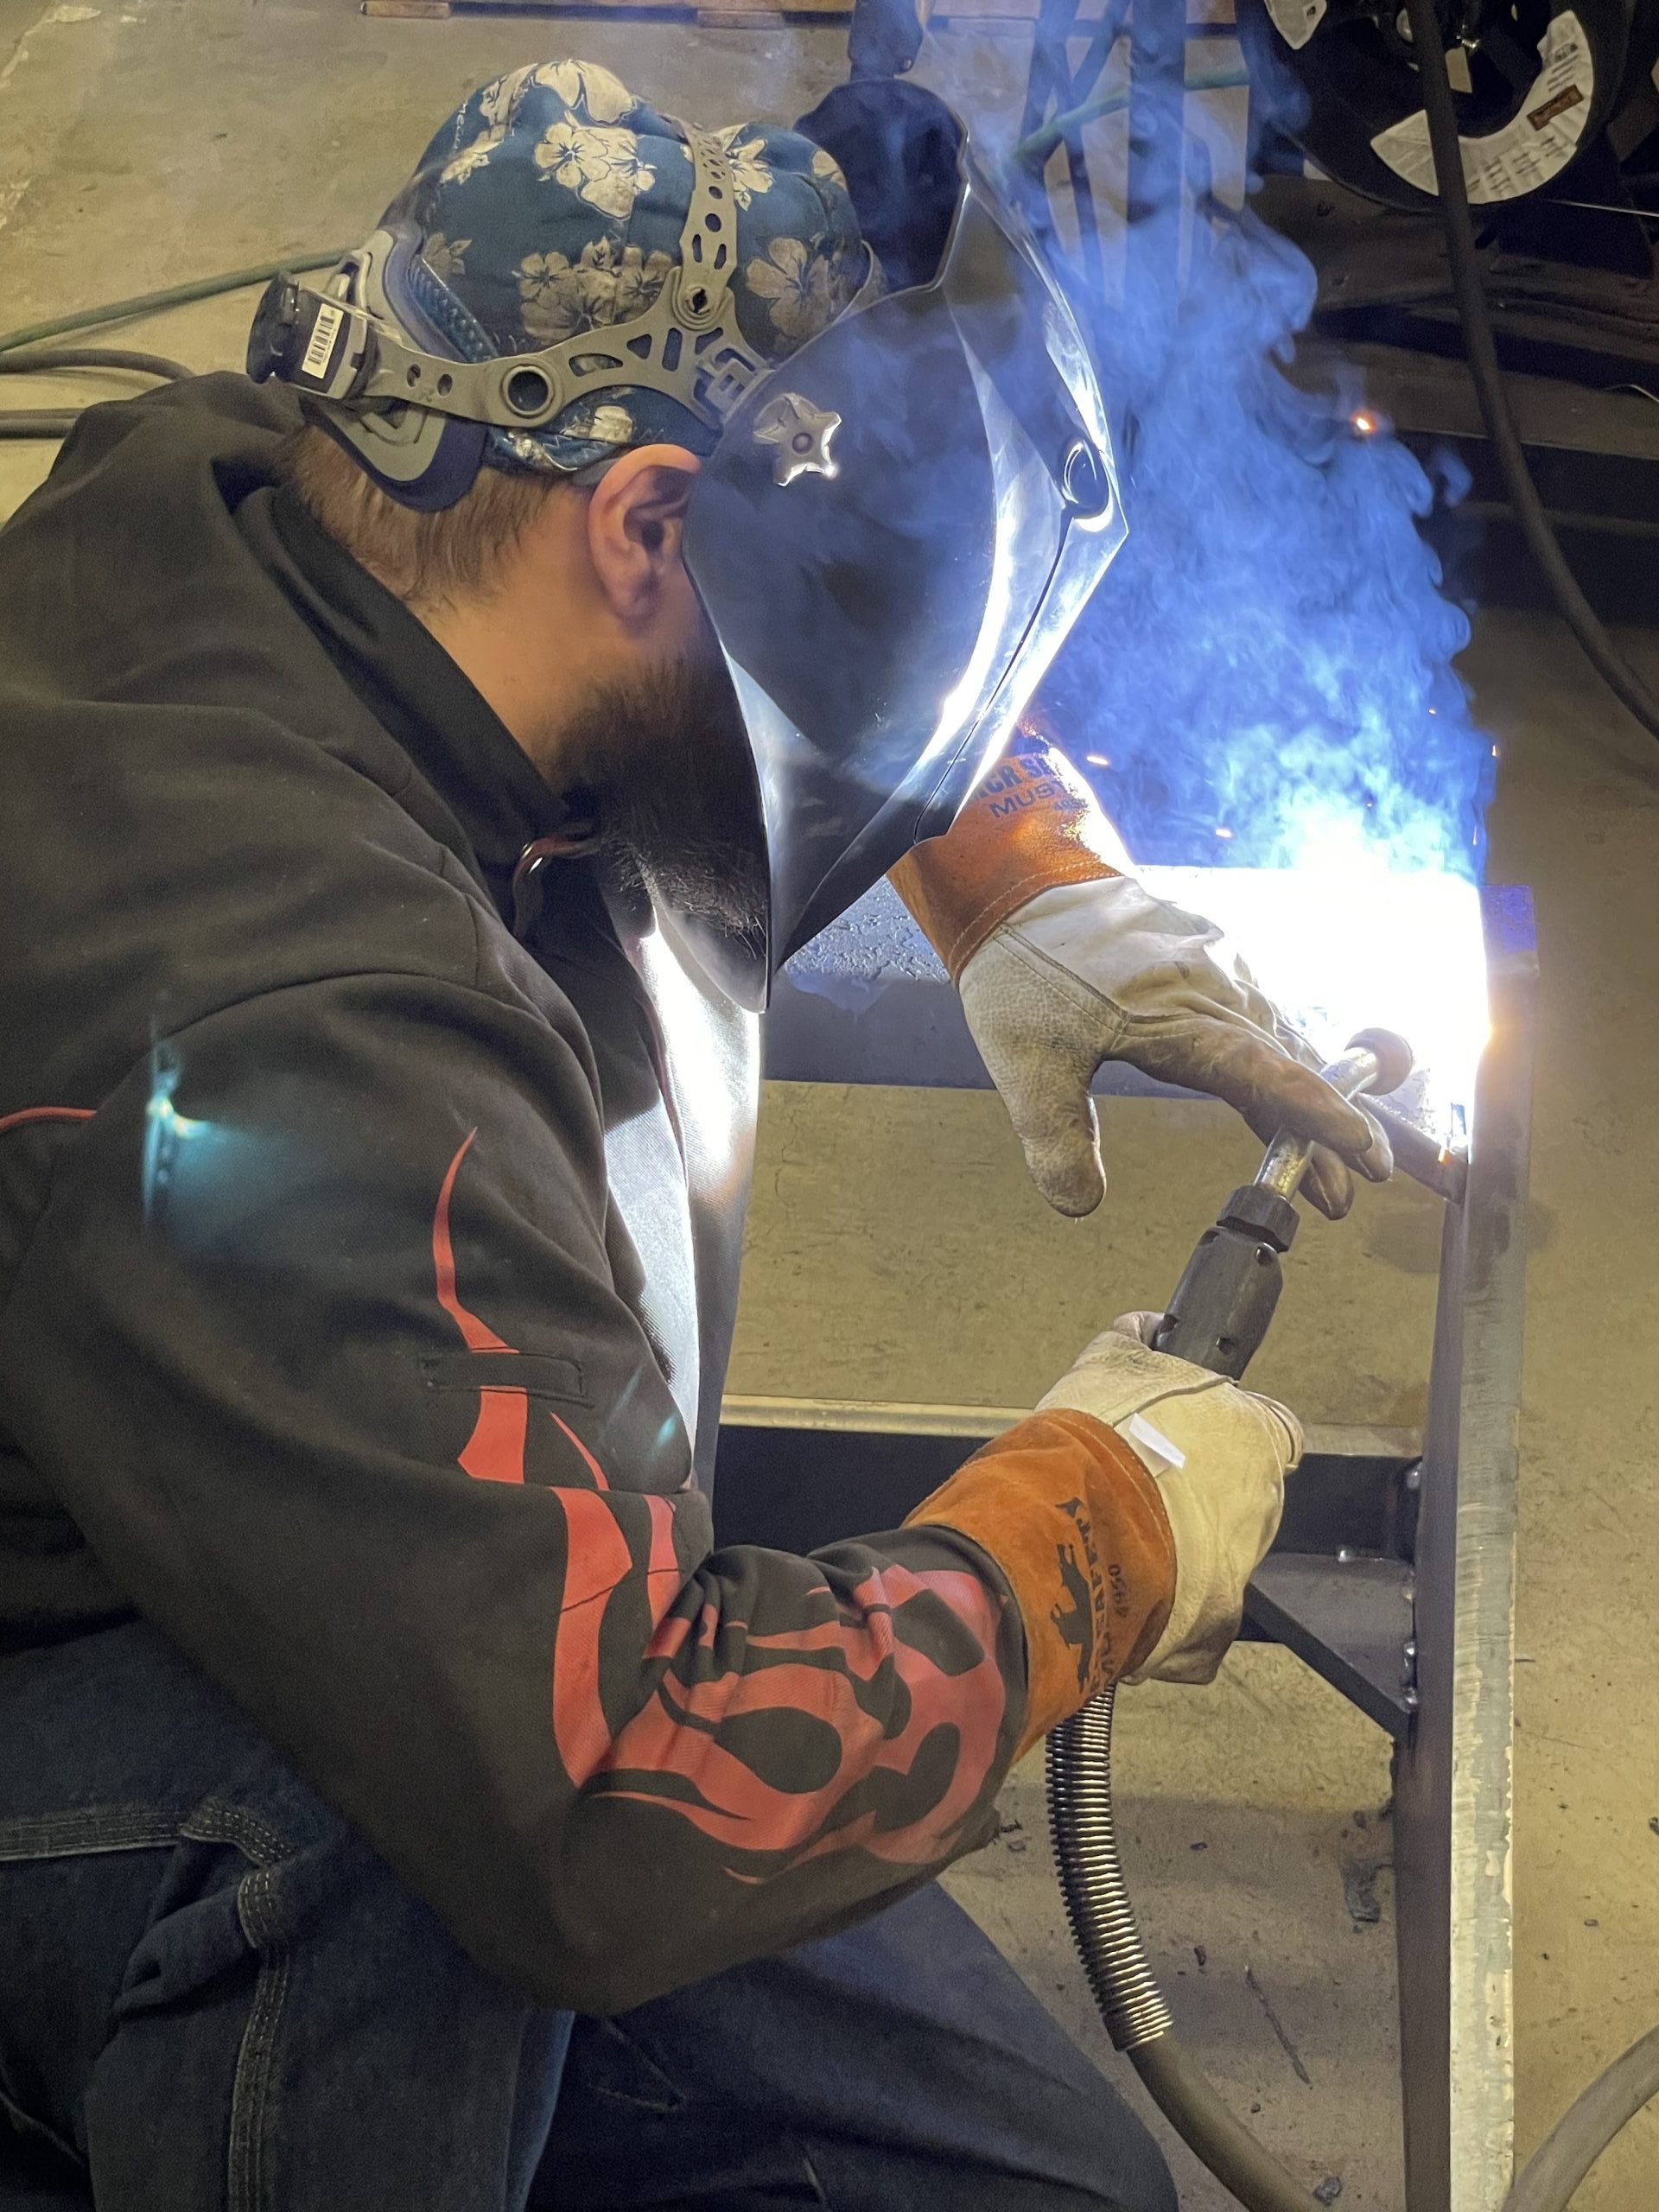 Deaerator | Deaerators | Custom Deaerator | Custom Deaerators | Welding with pride.